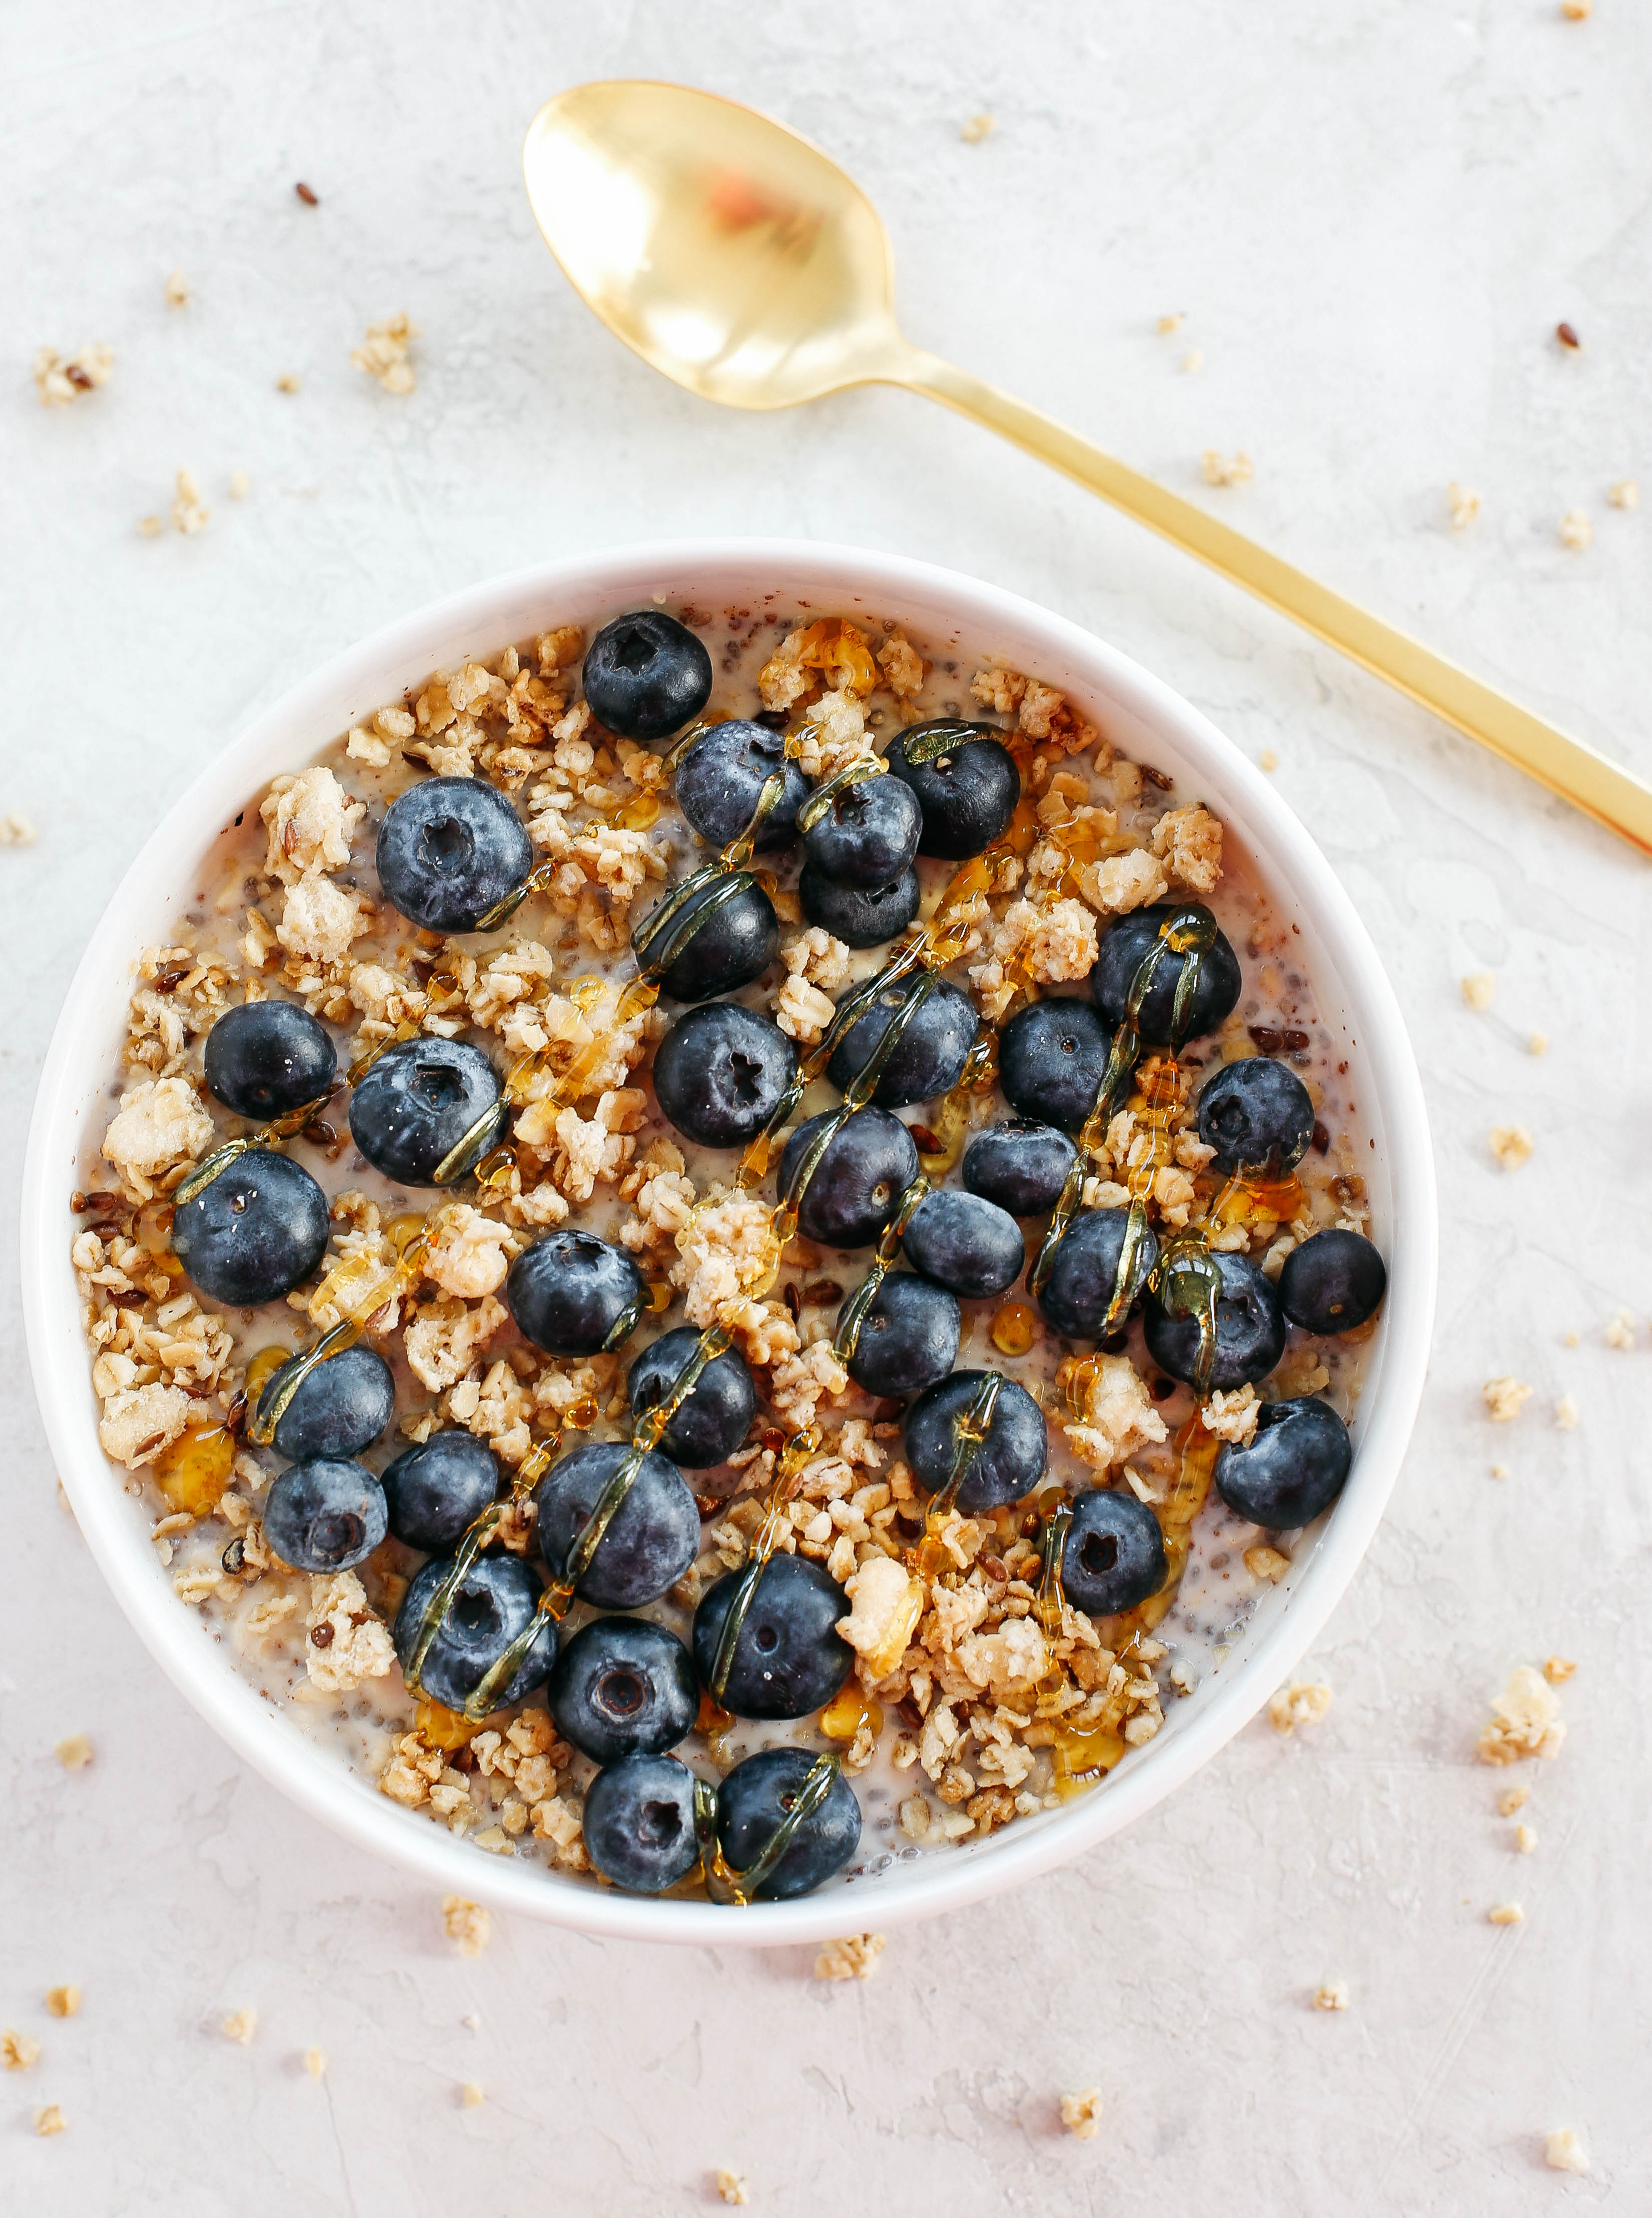 Blueberry and Granola Overnight Oats easily made in just minutes the night before giving you a deliciously healthy breakfast as soon as you wake up!